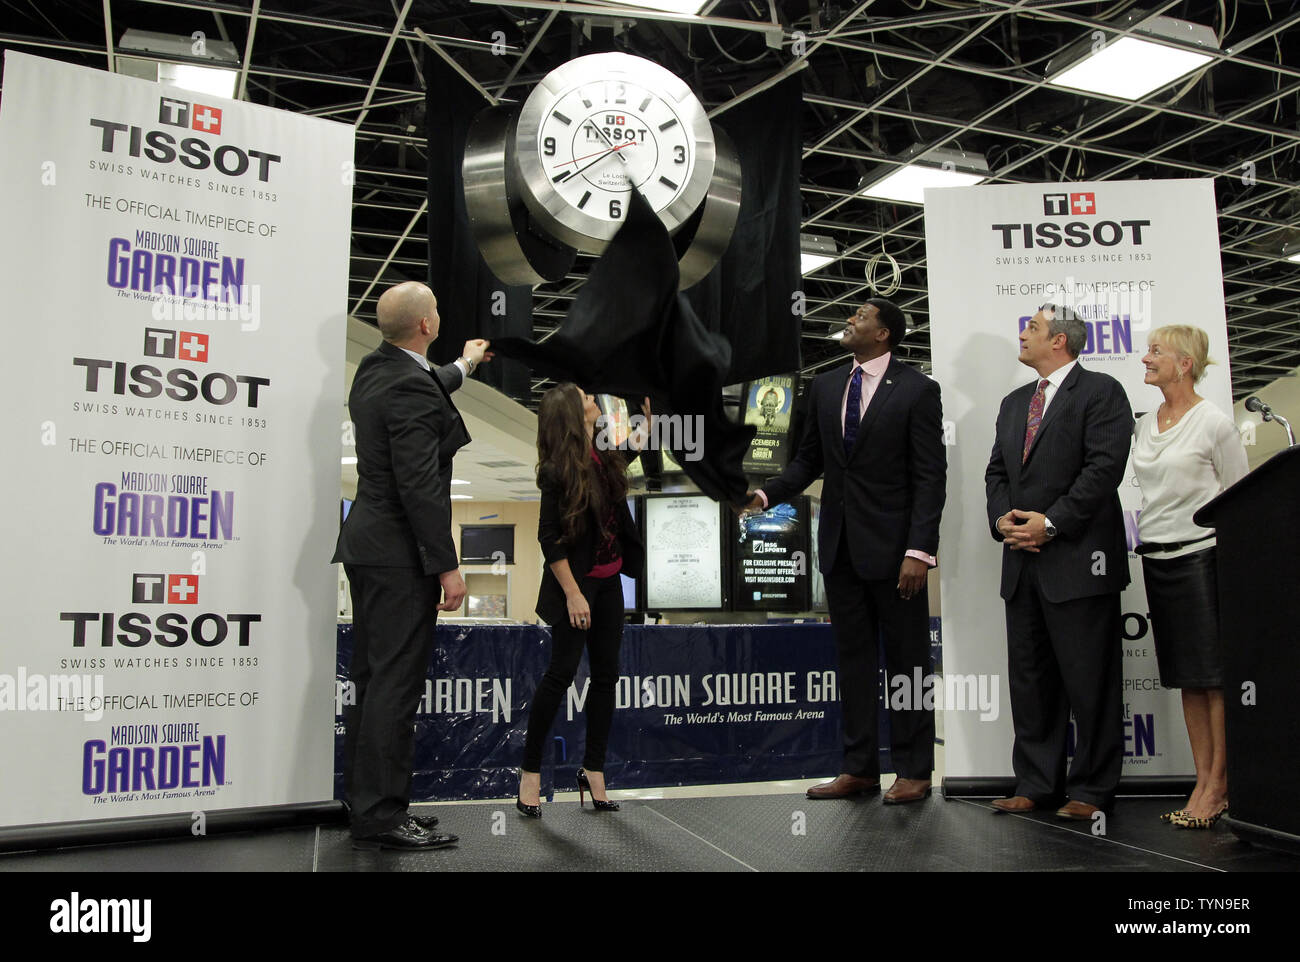 Tissot Swiss Watches The First Ever Official Timepiece Of Madison